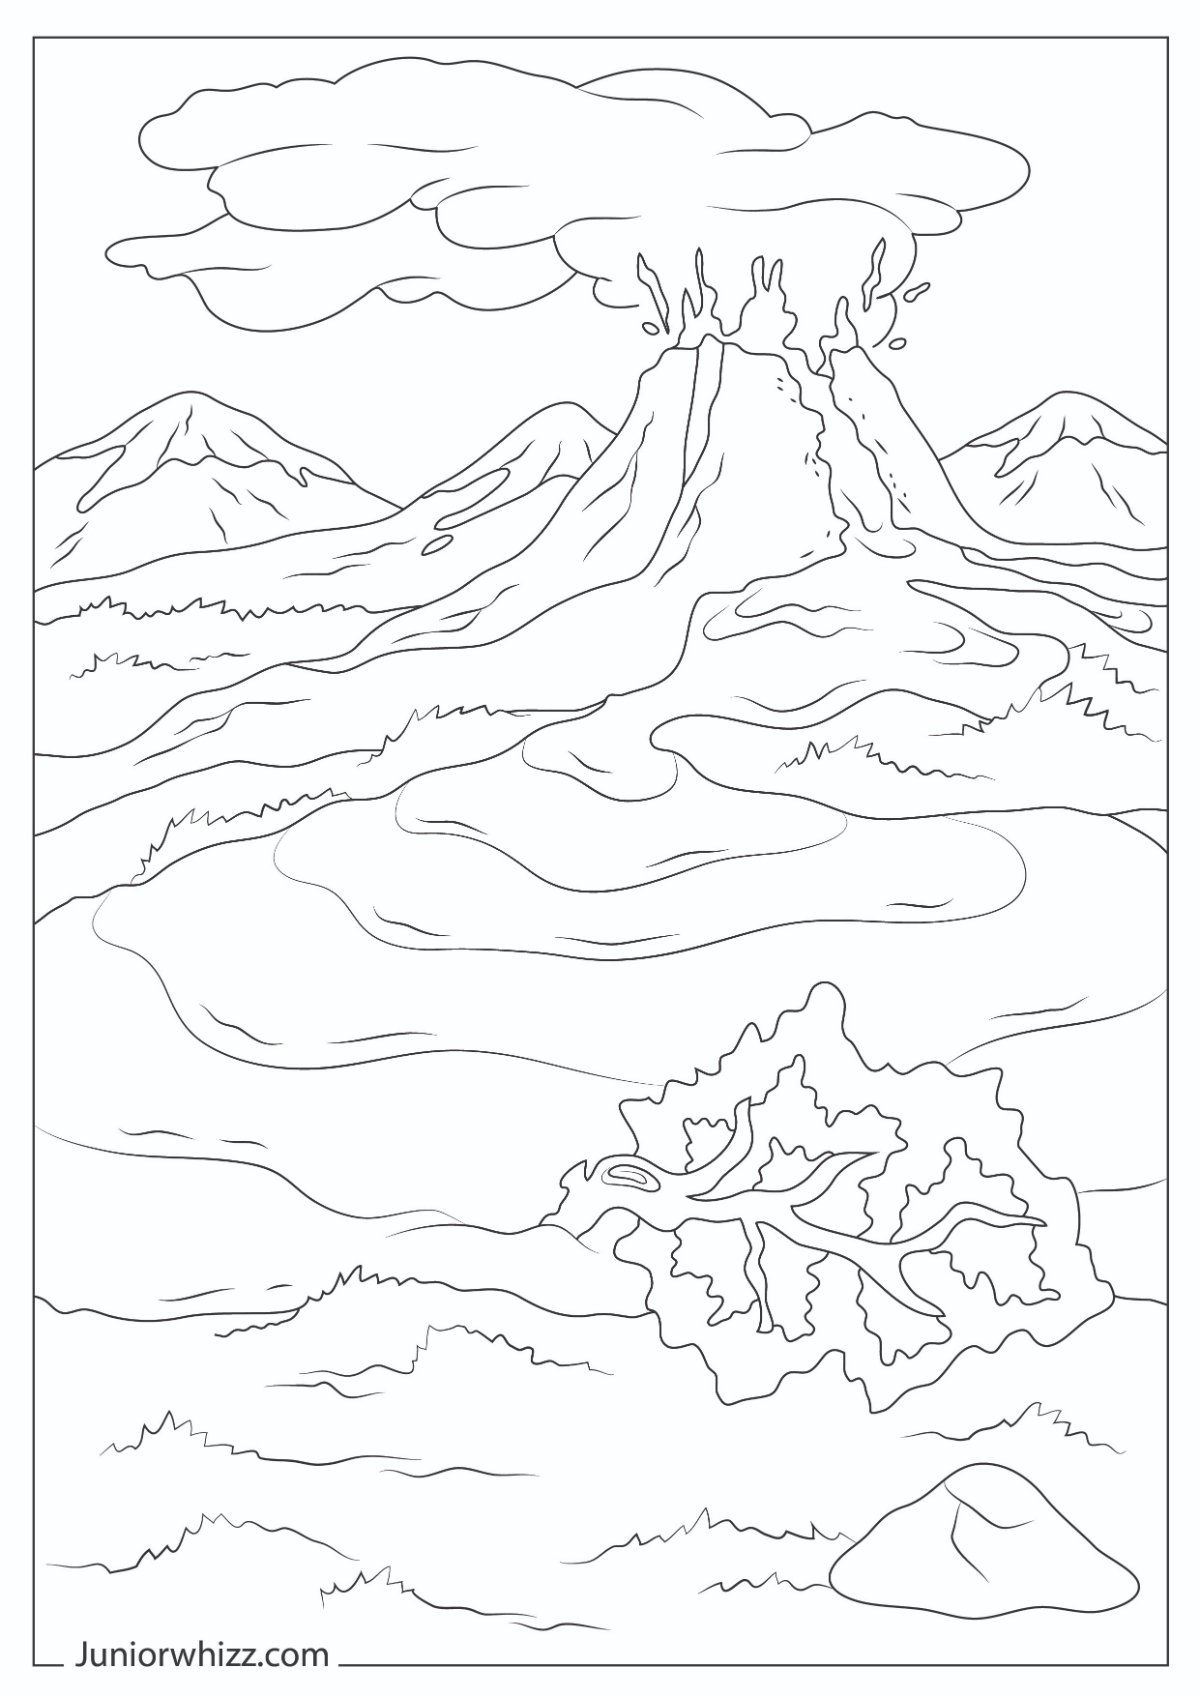 Volcano Coloring Pages with Book (12 Printable PDFs)